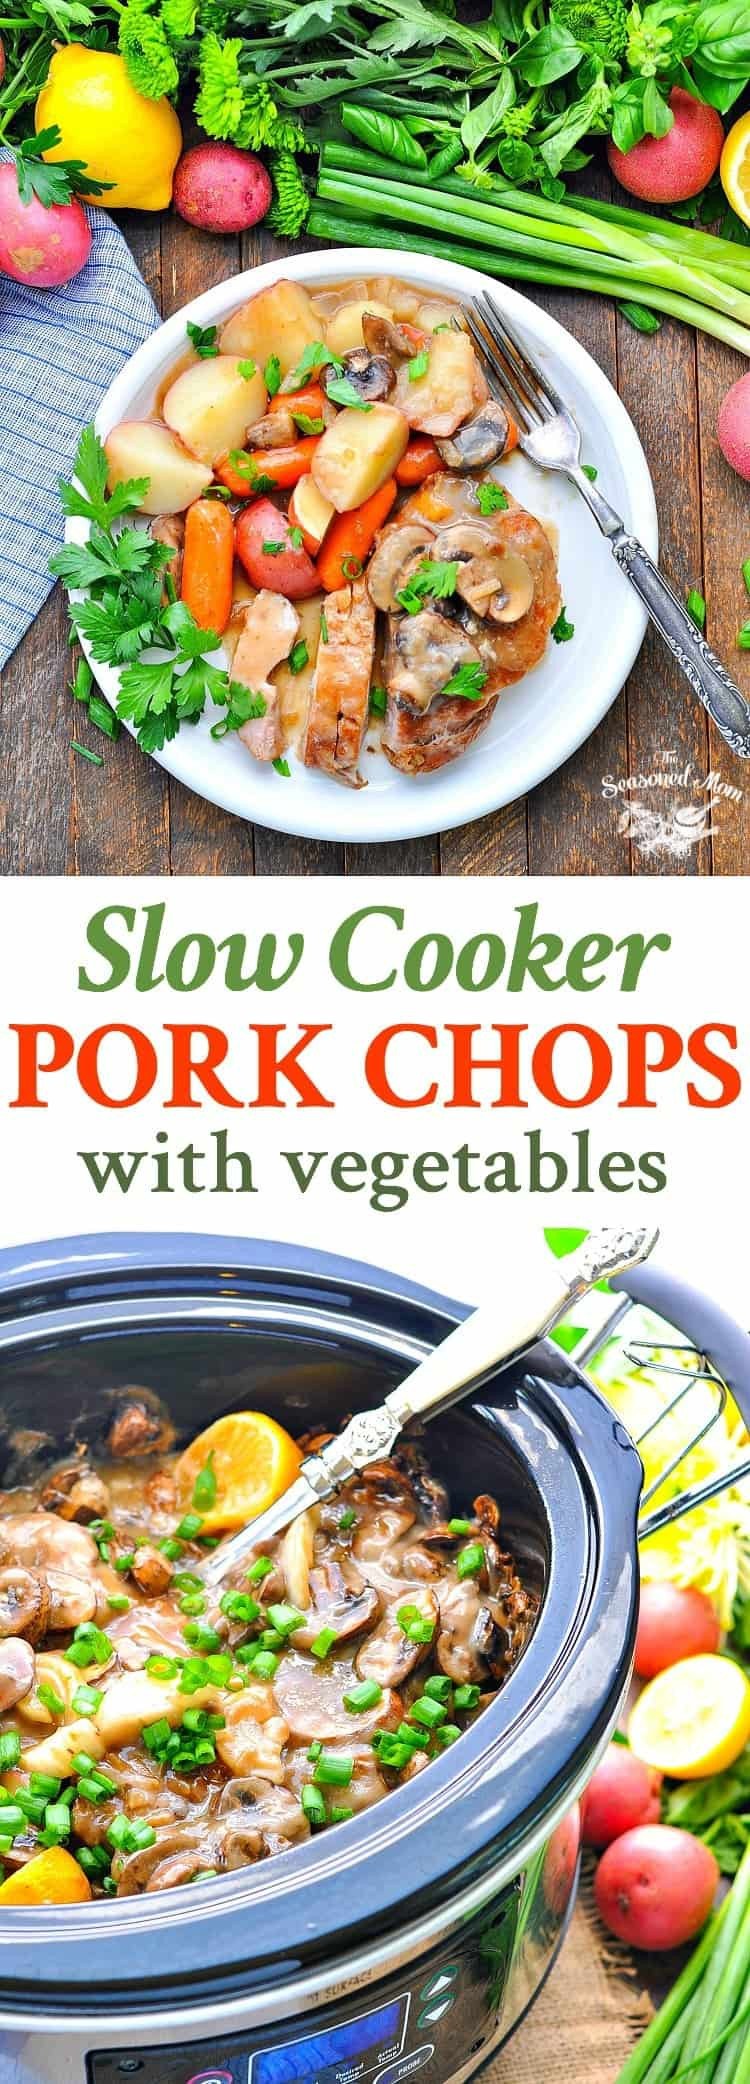 Slow Cooker Pork Chops And Gravy
 Slow Cooker Pork Chops with Ve ables and Gravy The